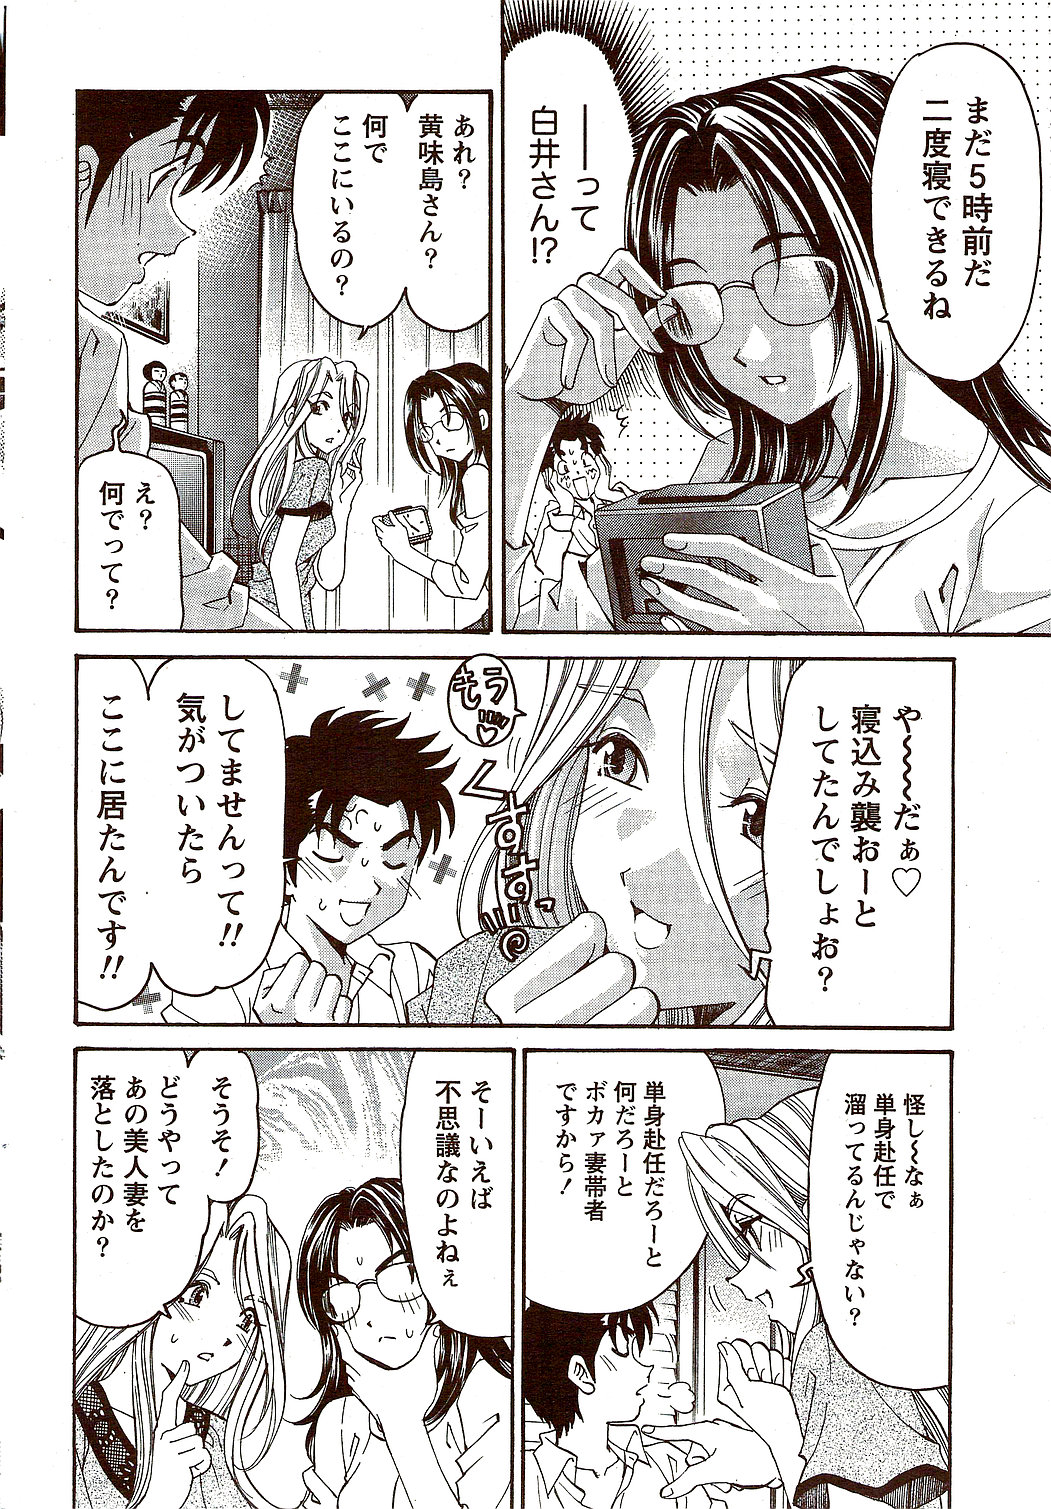 Monthly Vitaman 2009-10 page 24 full